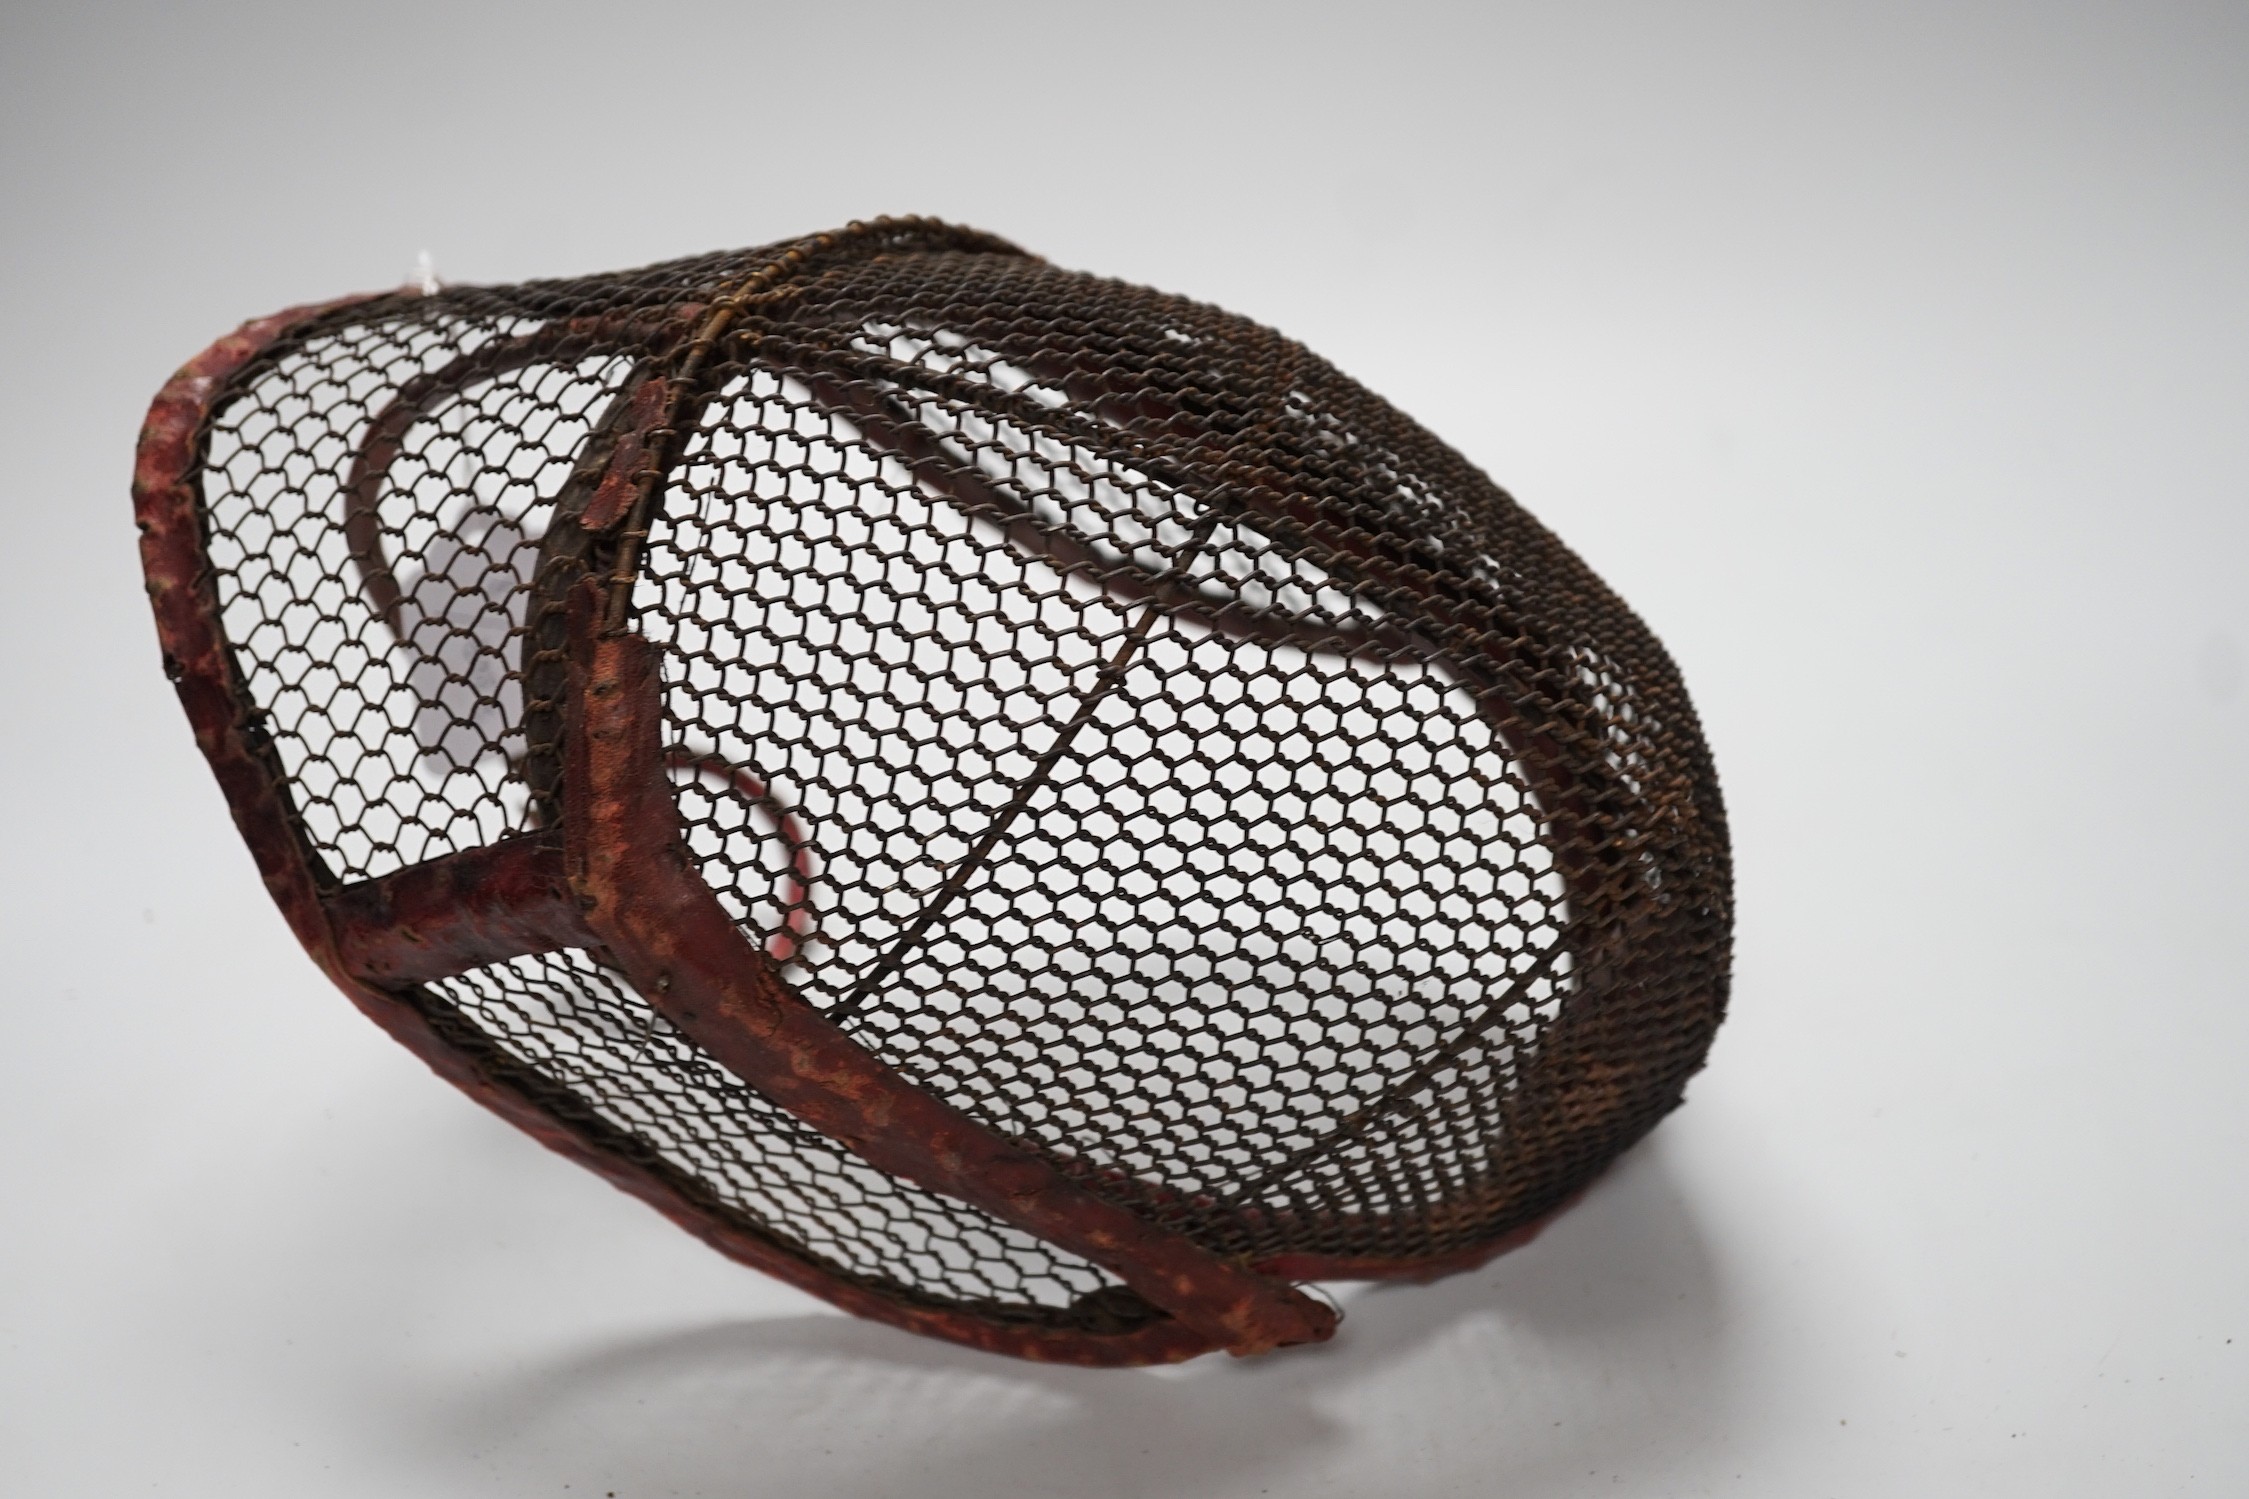 A fencing face mask, 30cms wide - Image 2 of 3